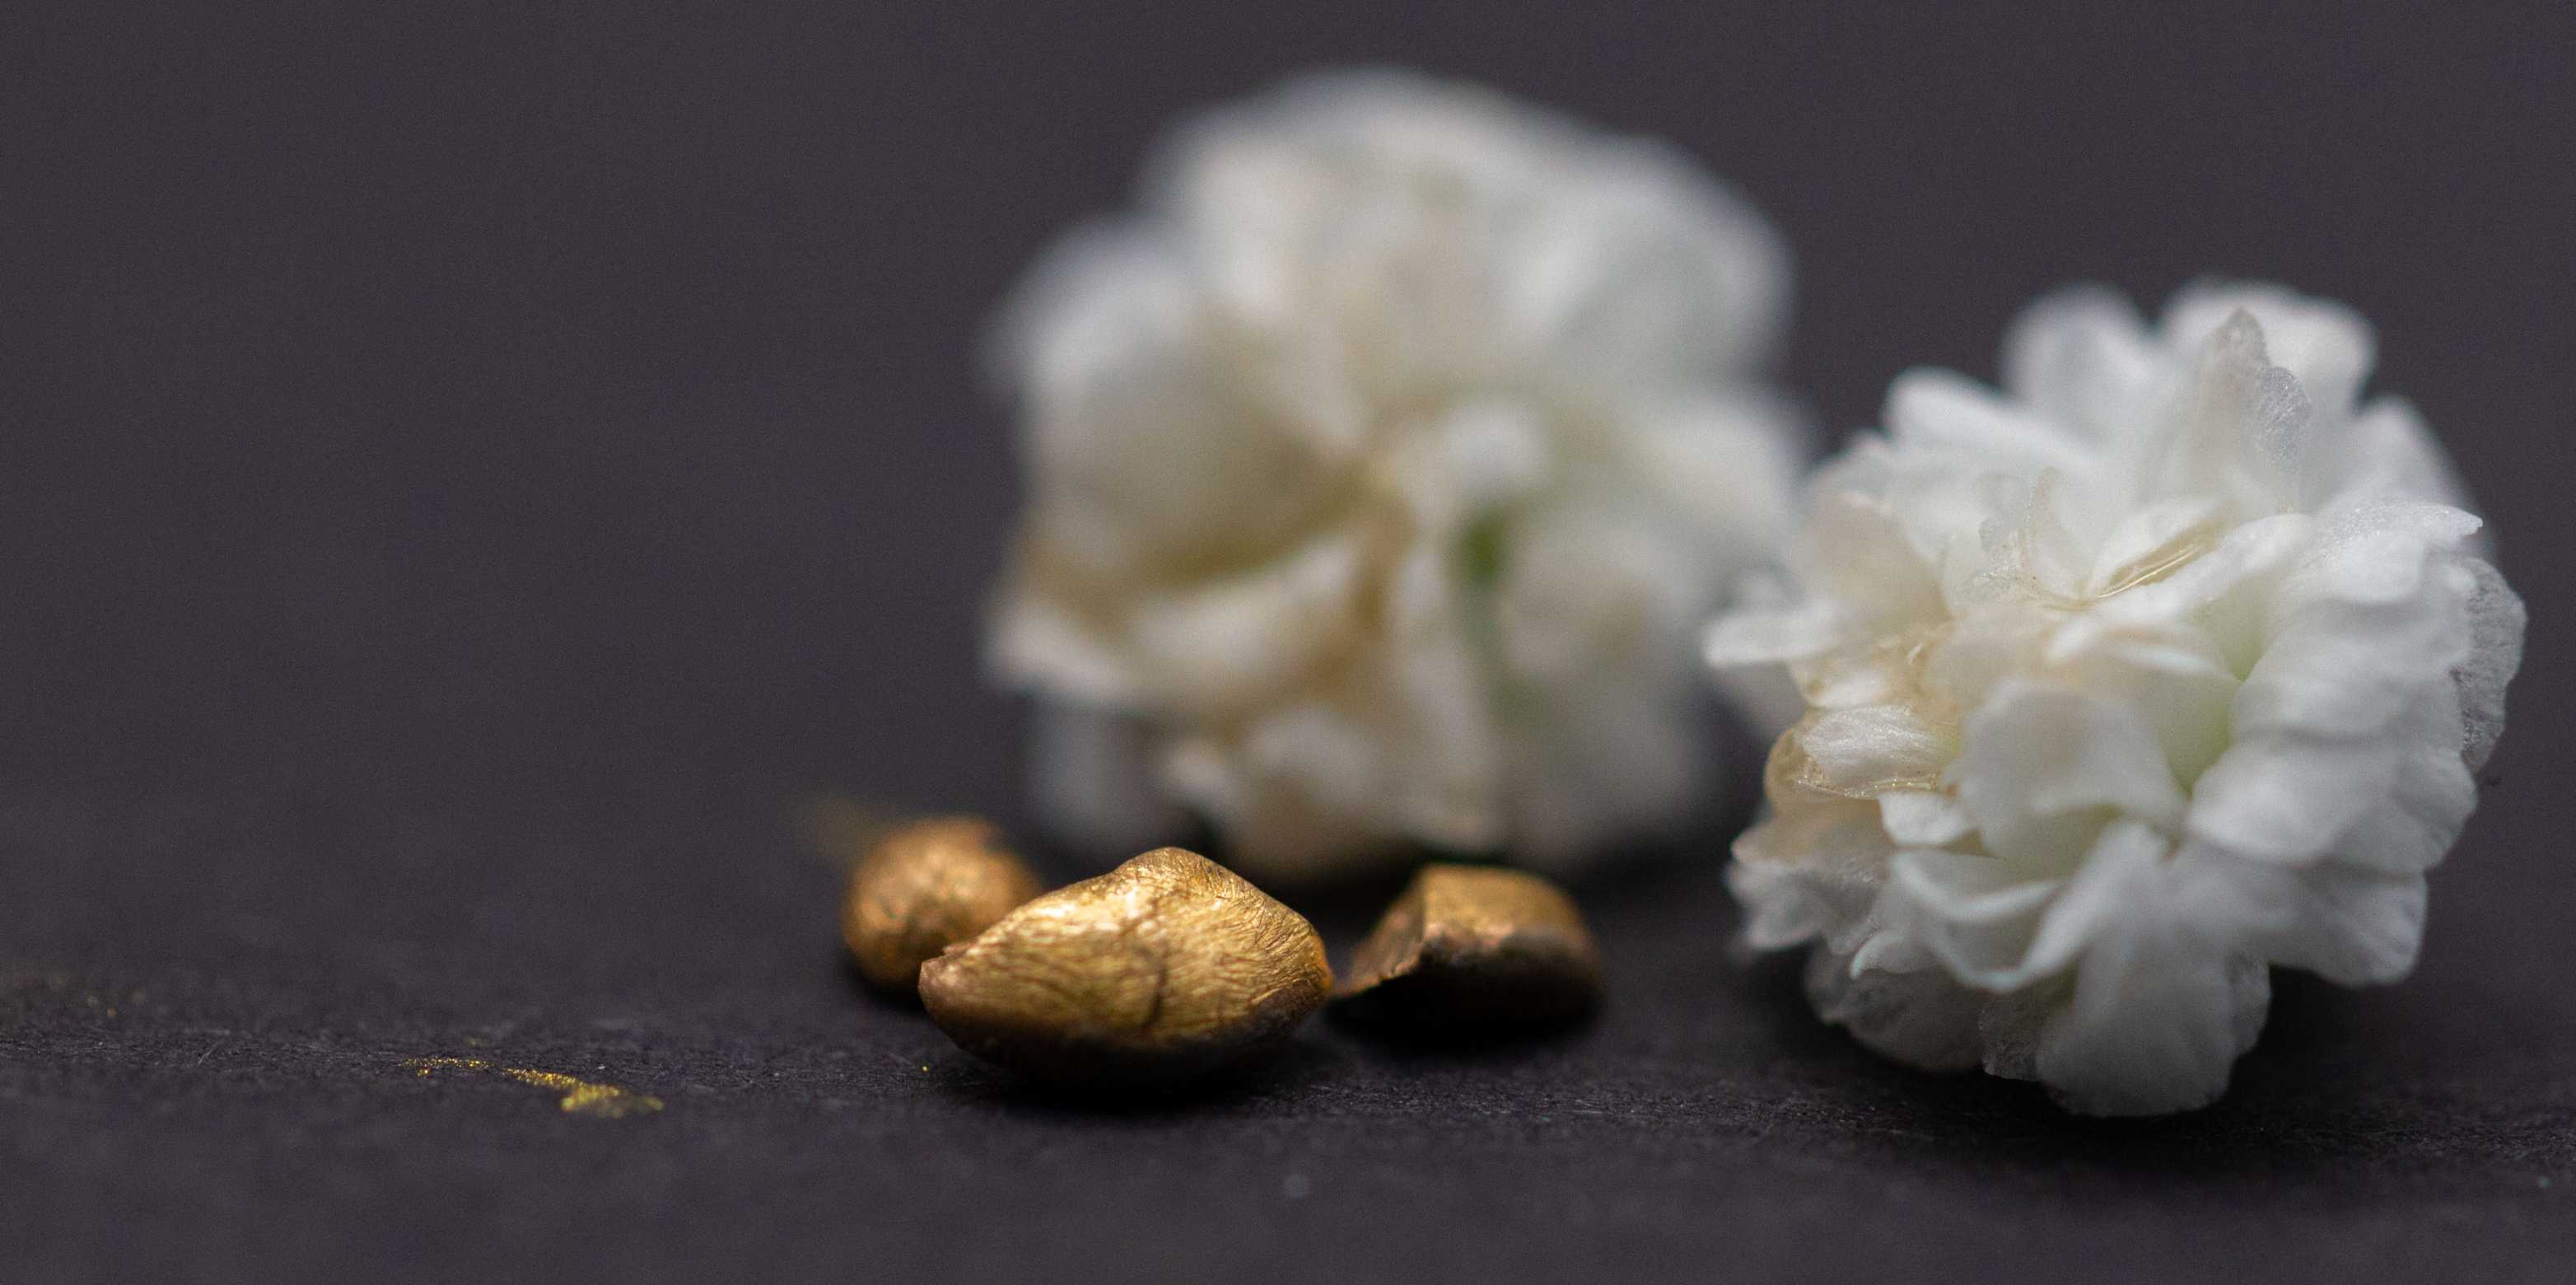 Three small gold nuggets sit on a gray surface.